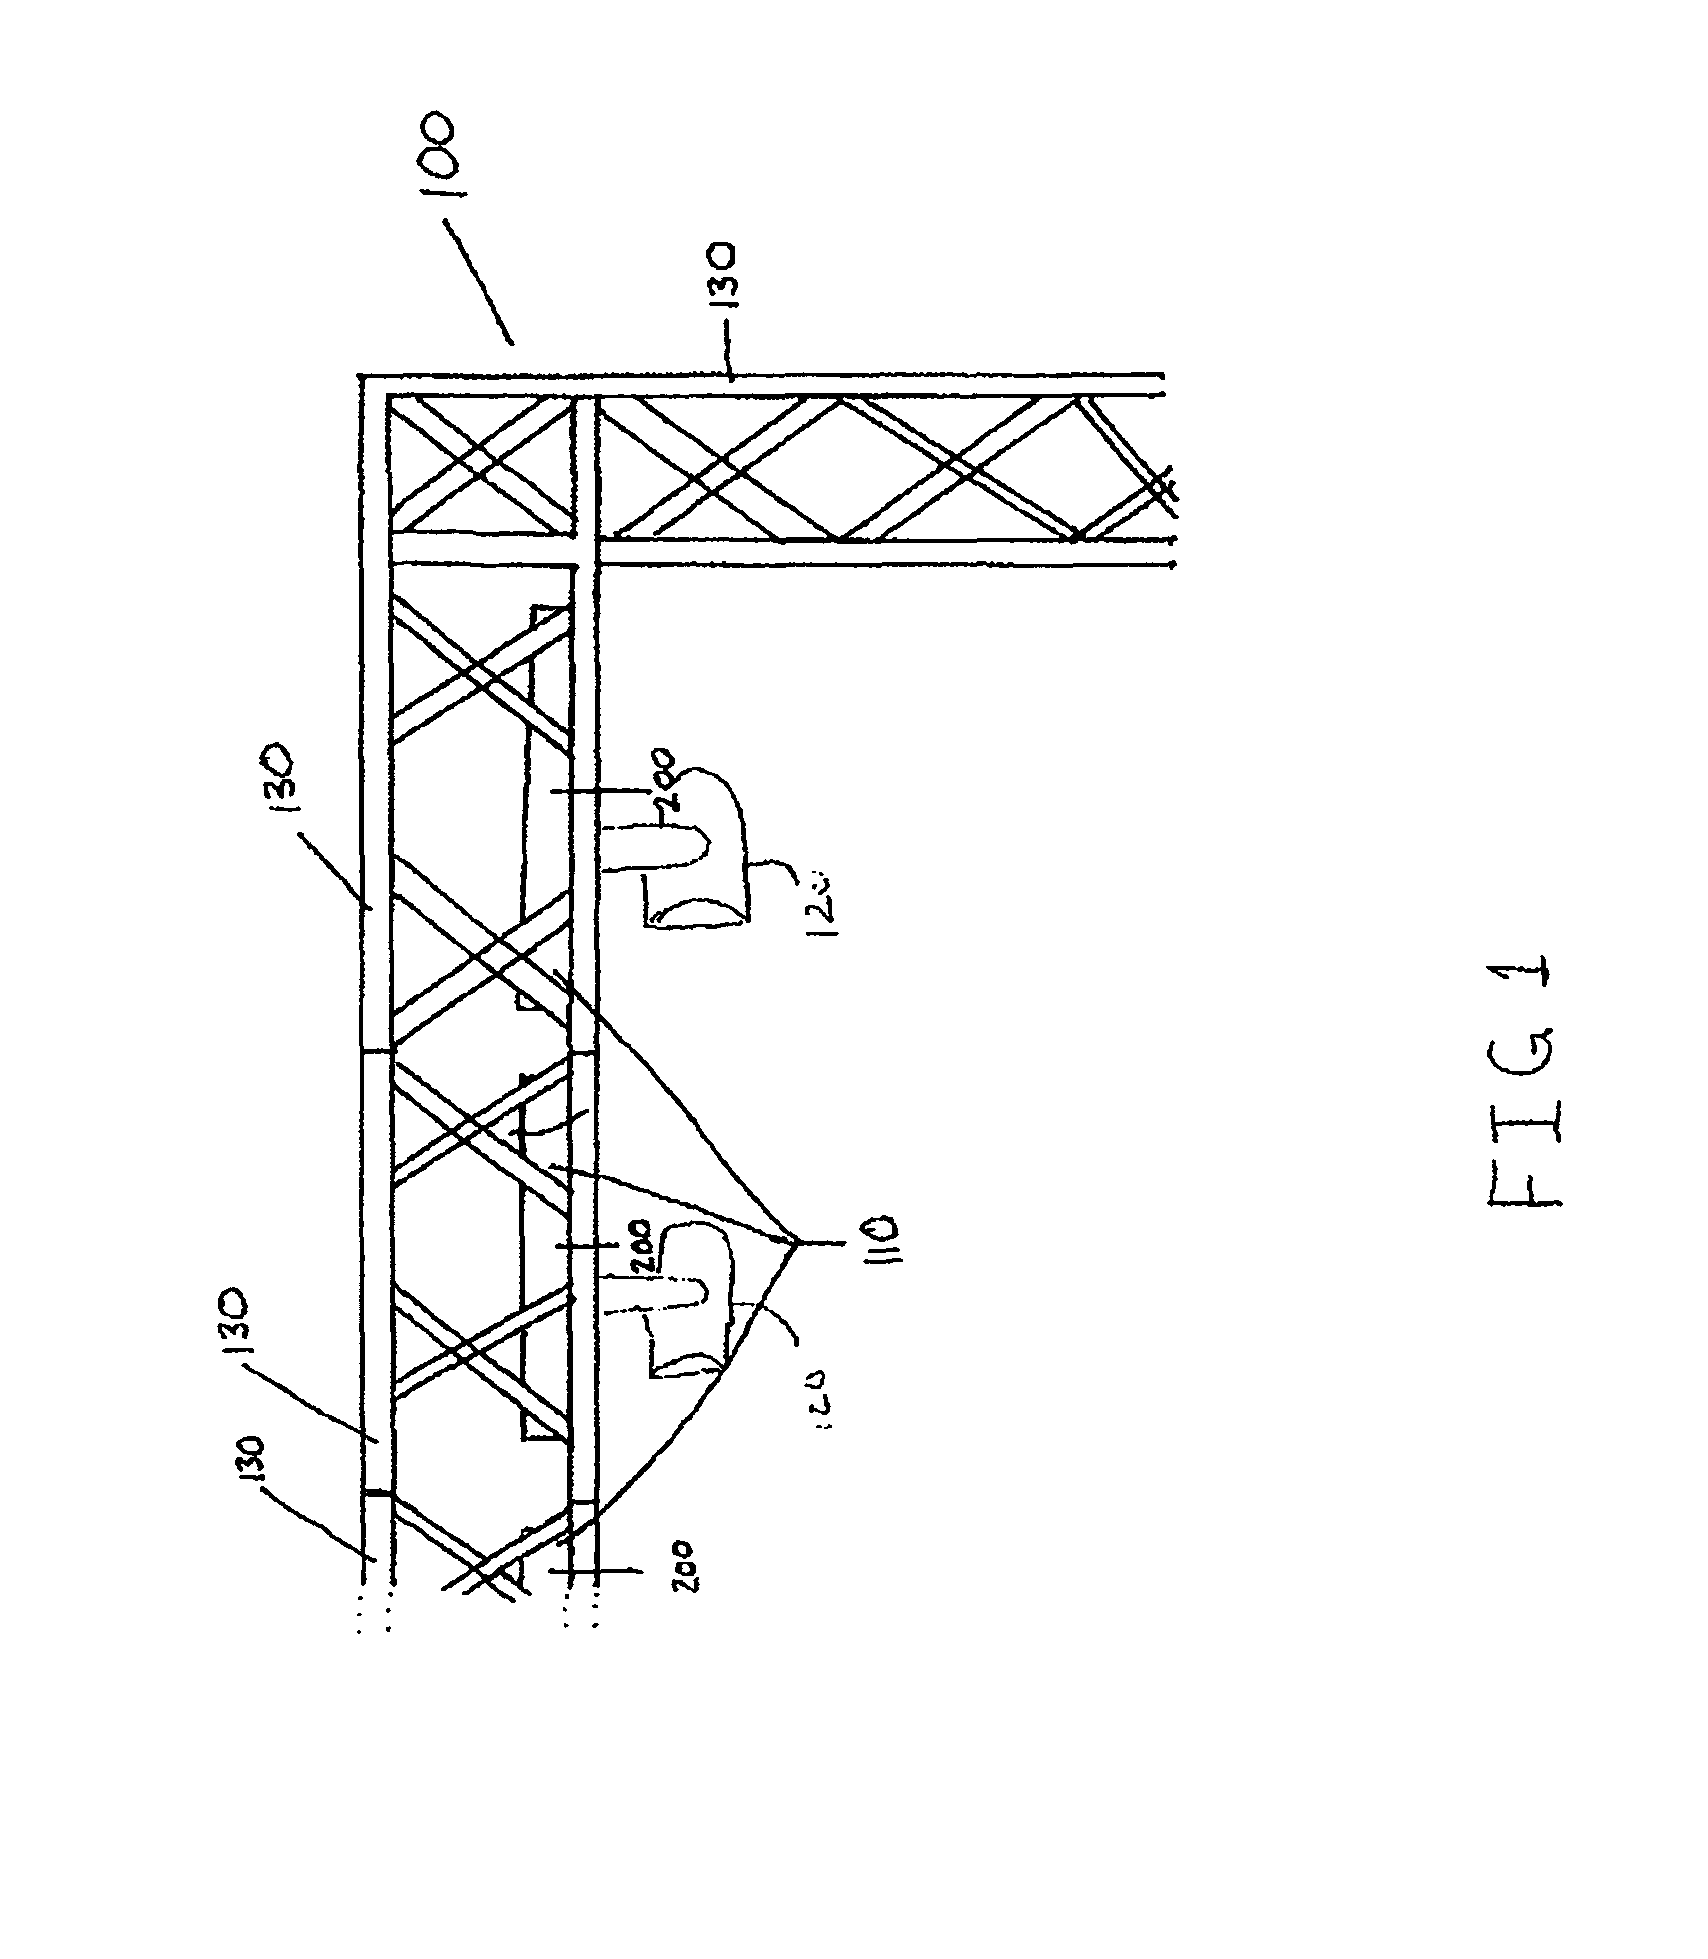 Systems and methods for distributing power and data in a lighting system